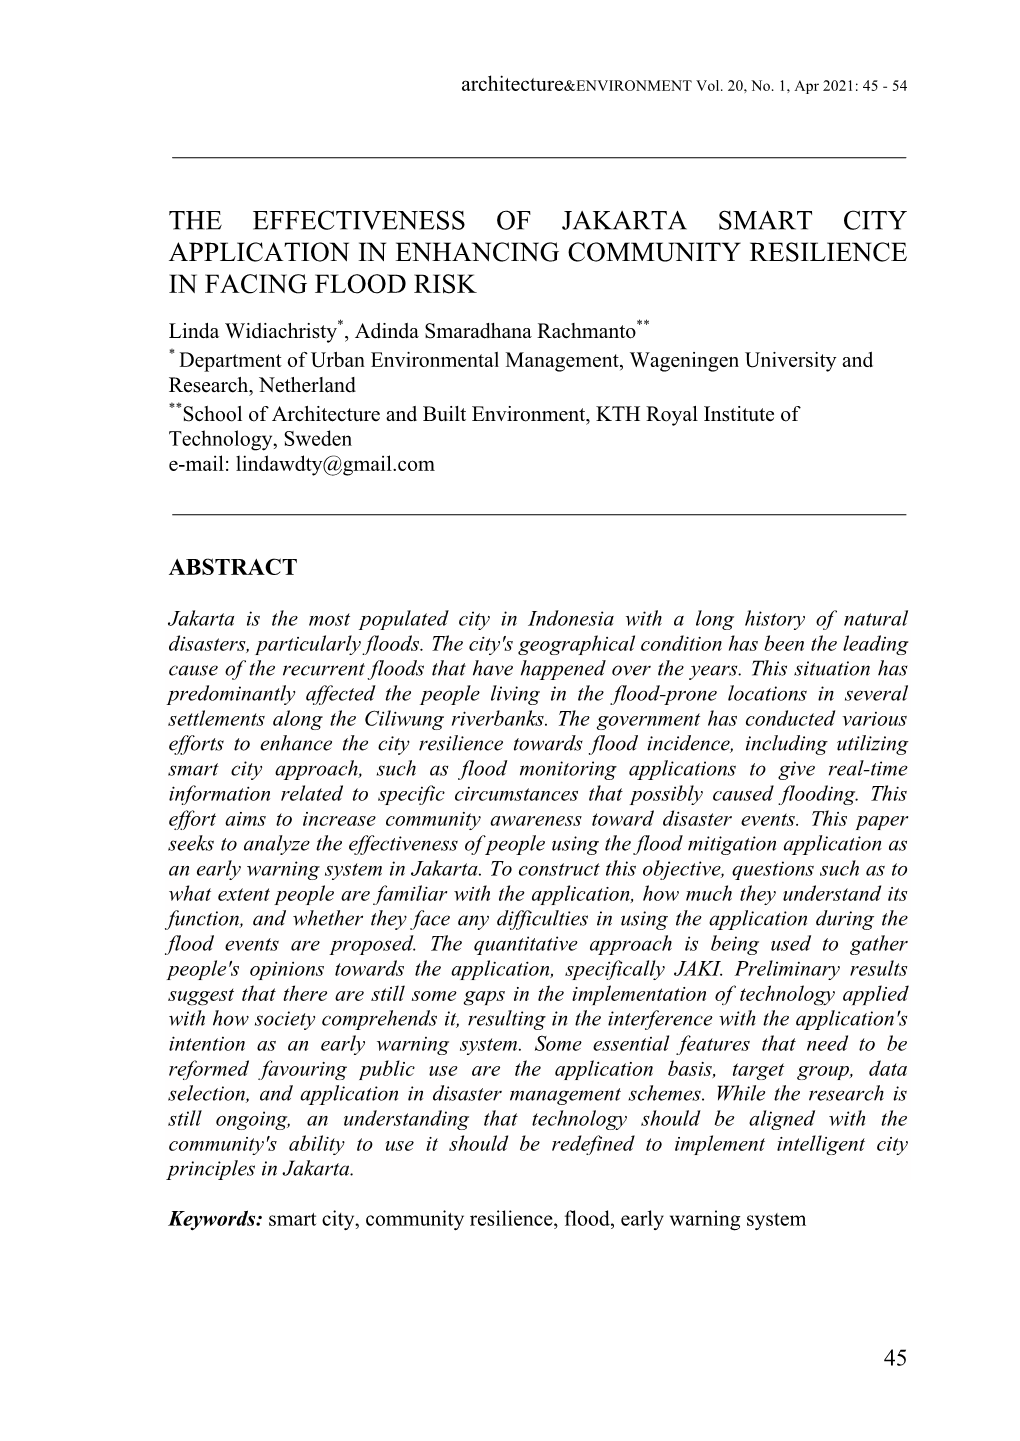 The Effectiveness of Jakarta Smart City Application in Enhancing Community Resilience in Facing Flood Risk